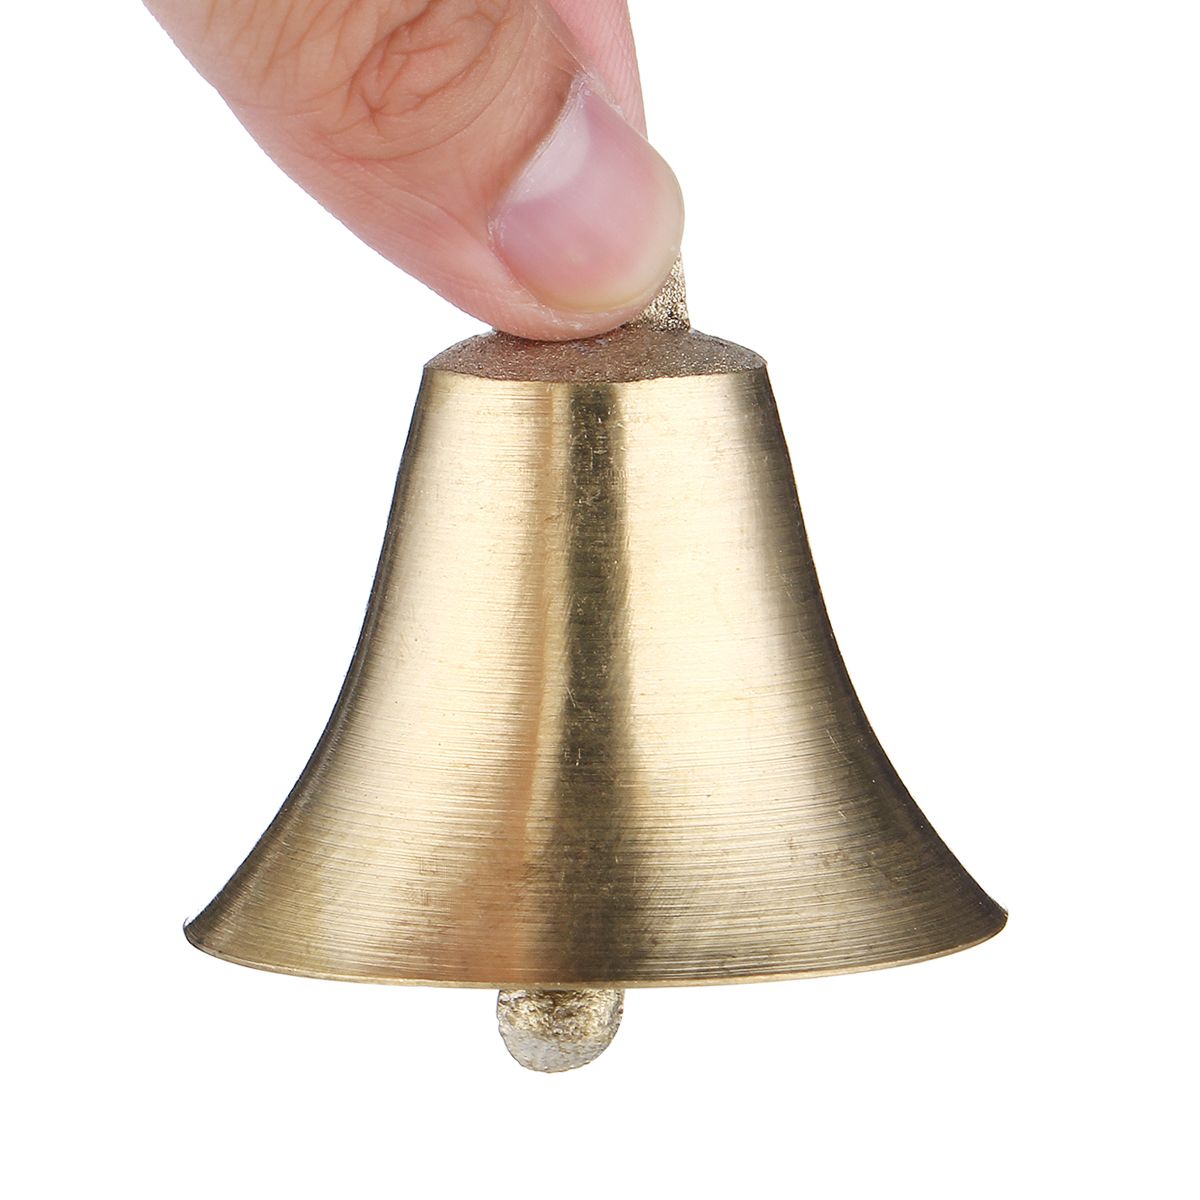 5050mm-Pure-Copper-Bells-Cow-Horse-Sheep-Animal-Neck-Decorations-Farm-Grazing-Super-Loud-Bell-1364769